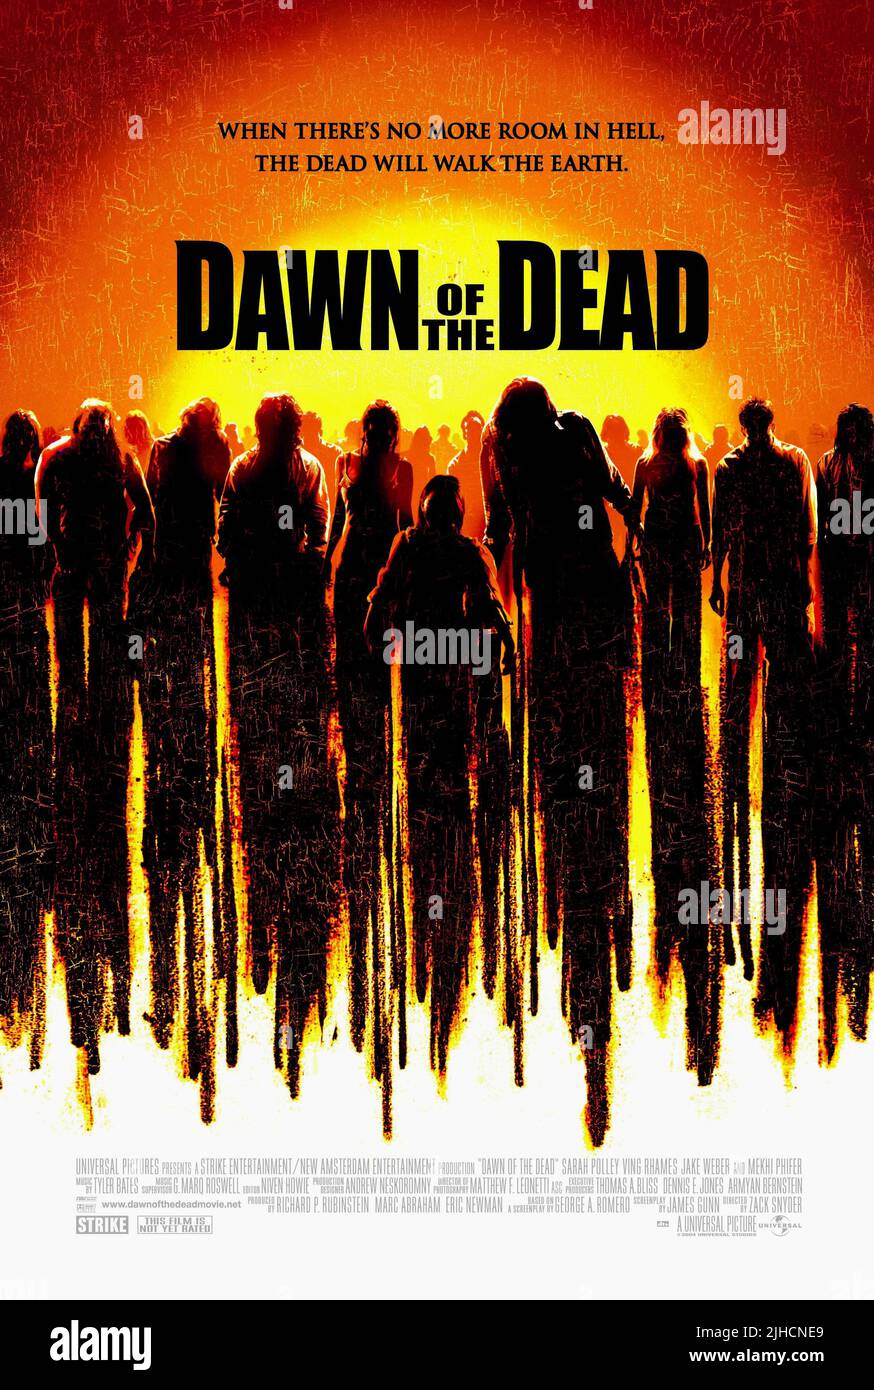 FILM POSTER, DAWN OF THE DEAD, 2004 Stock Photo